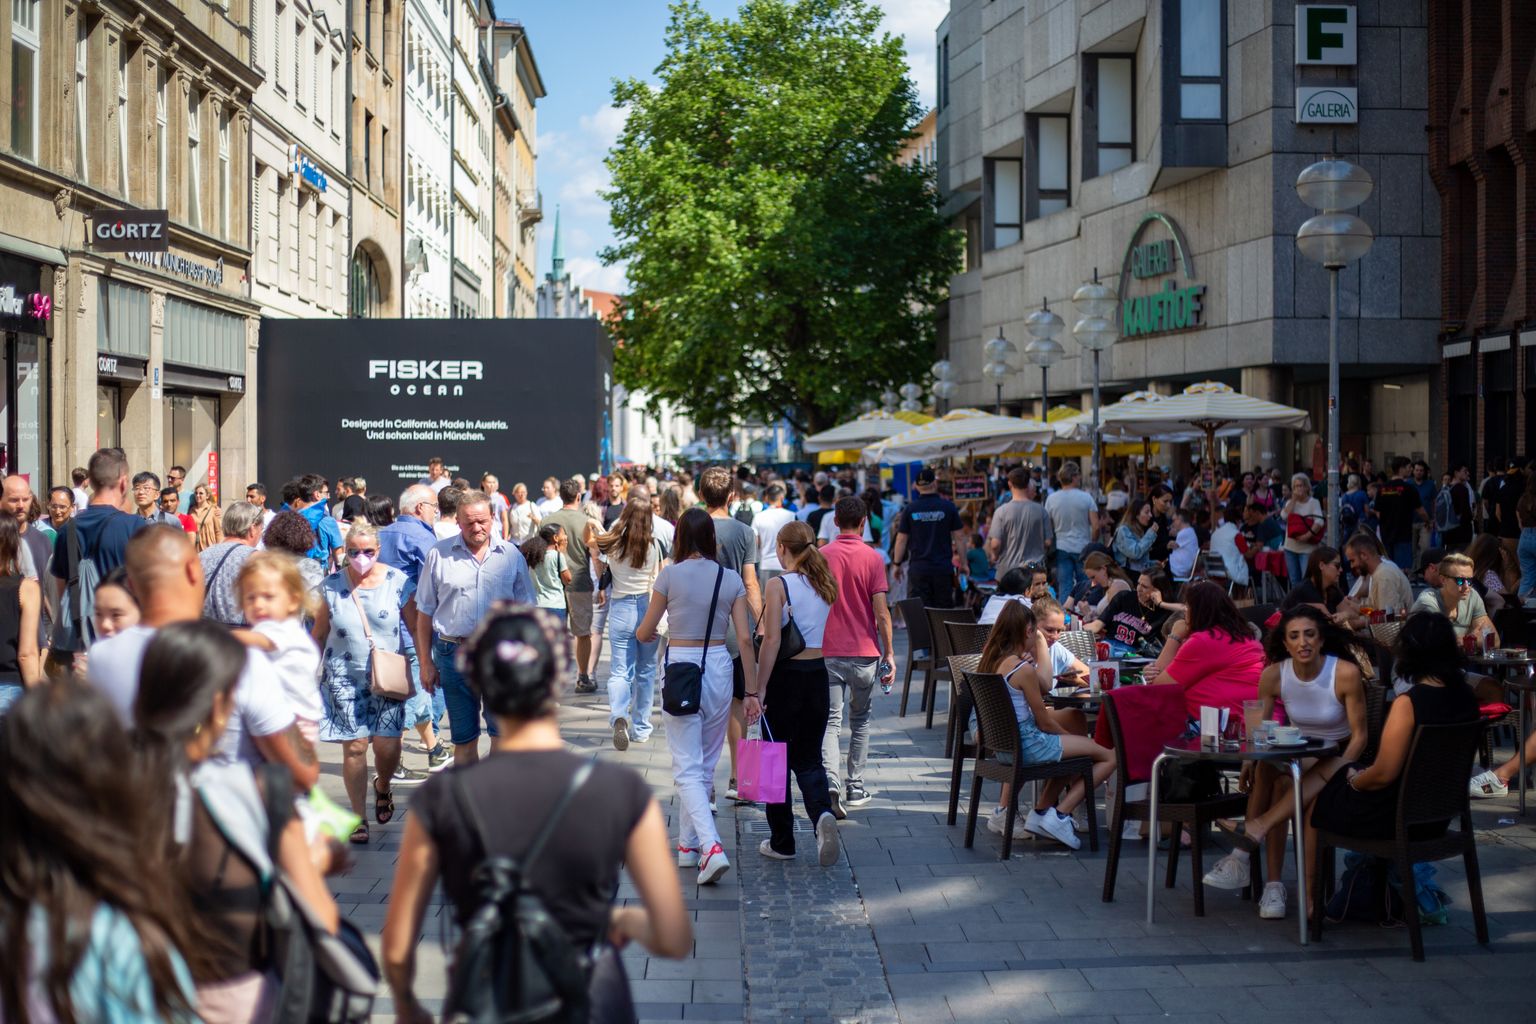 July 30, 2022, Munich, Bavaria, Germany: The pedestrian zone in Munich, Germany is filled by shoppers on July 30, 2022. People go shopping in the many stores. (Credit Image: © Alexander Pohl/Alto Press via ZUMA Press)